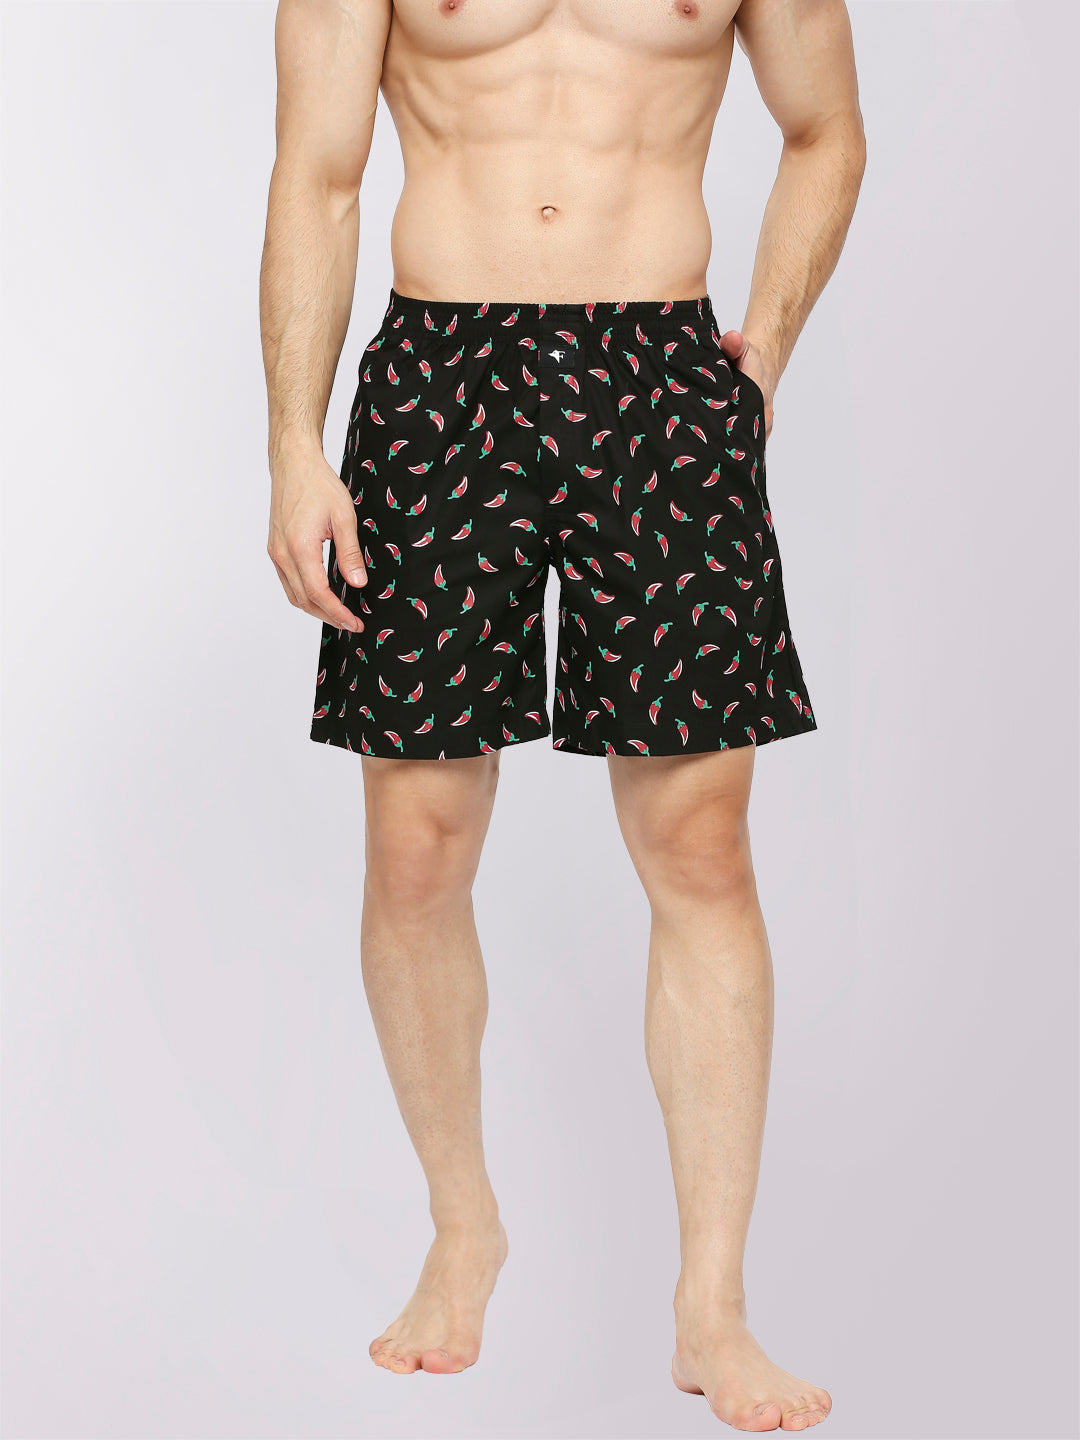 BOKSA - Printed Cotton Boxers Shorts for Men | Assorted